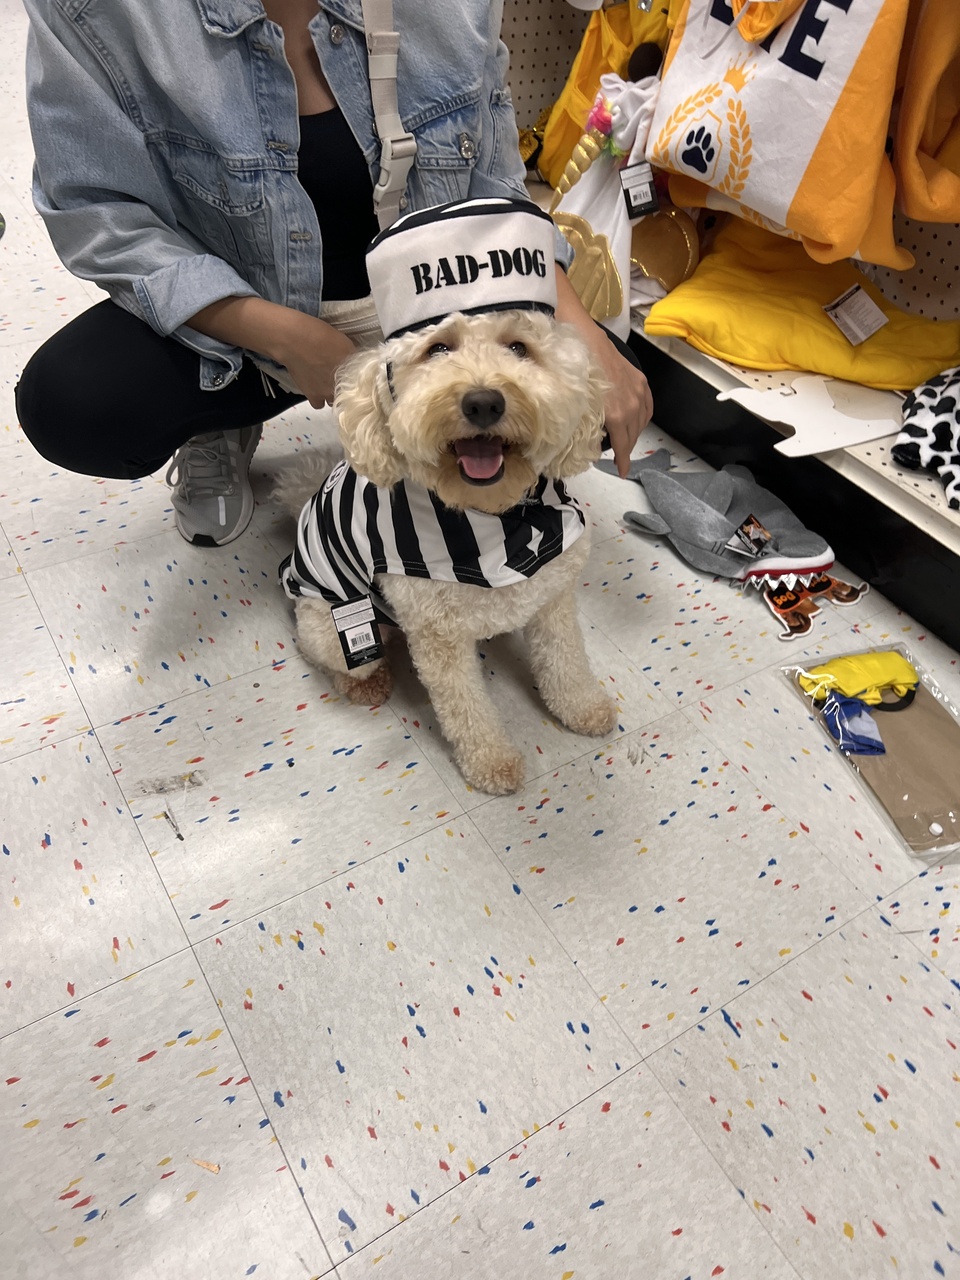 This inmate is so ready for Halloween. Where is my prize!?